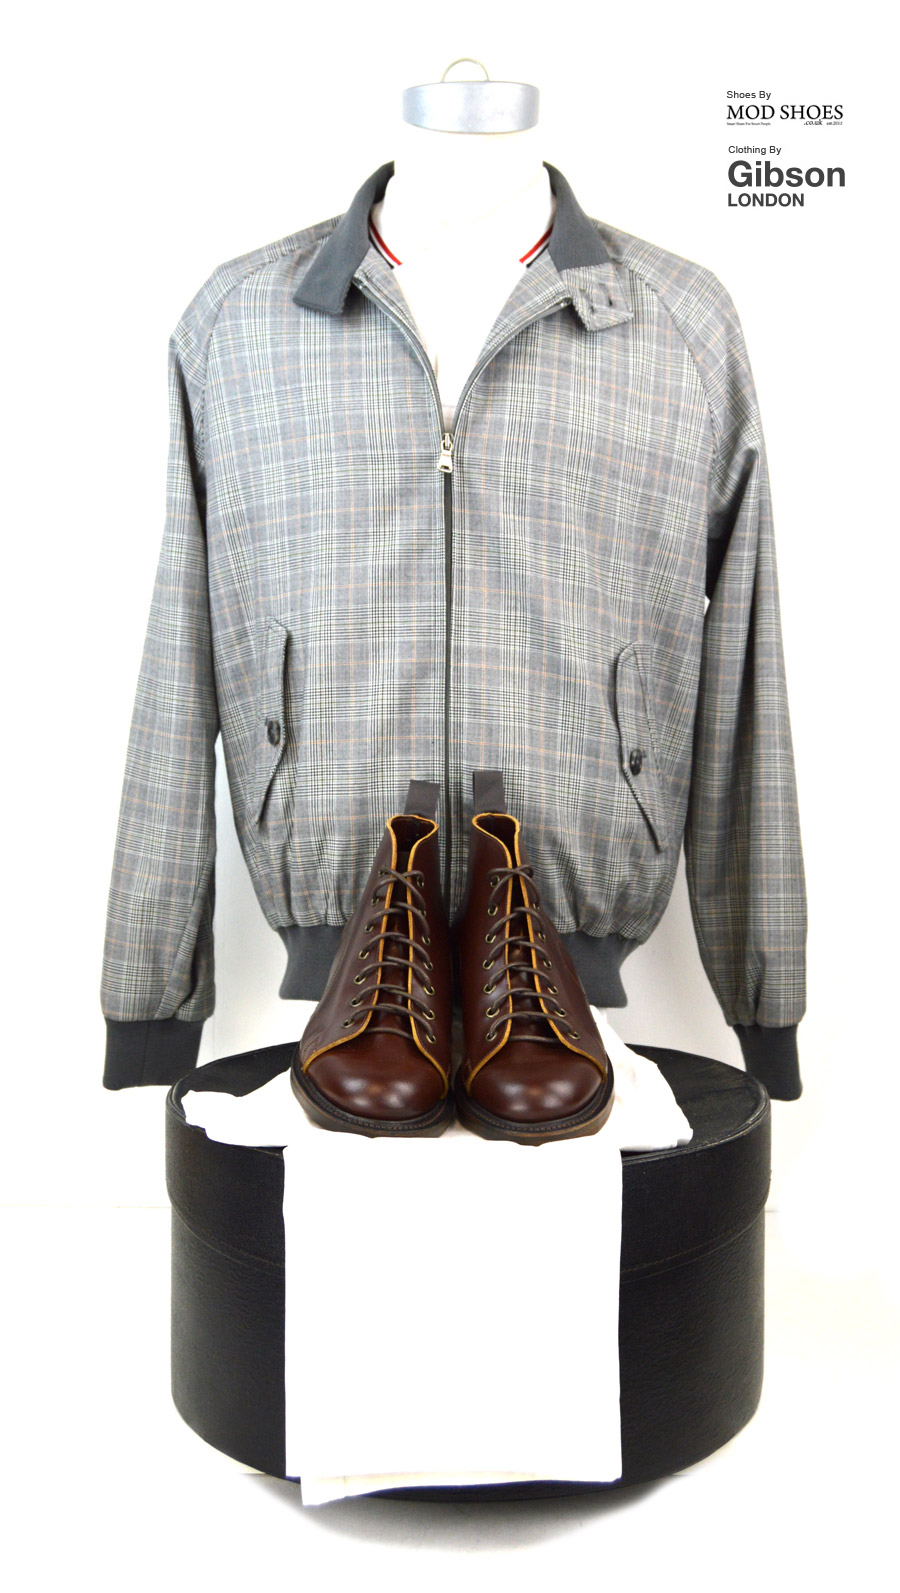 modshoes-nut-brown-monkey-boots-with-prince-of-wales-harrington-from-gibson-clothes